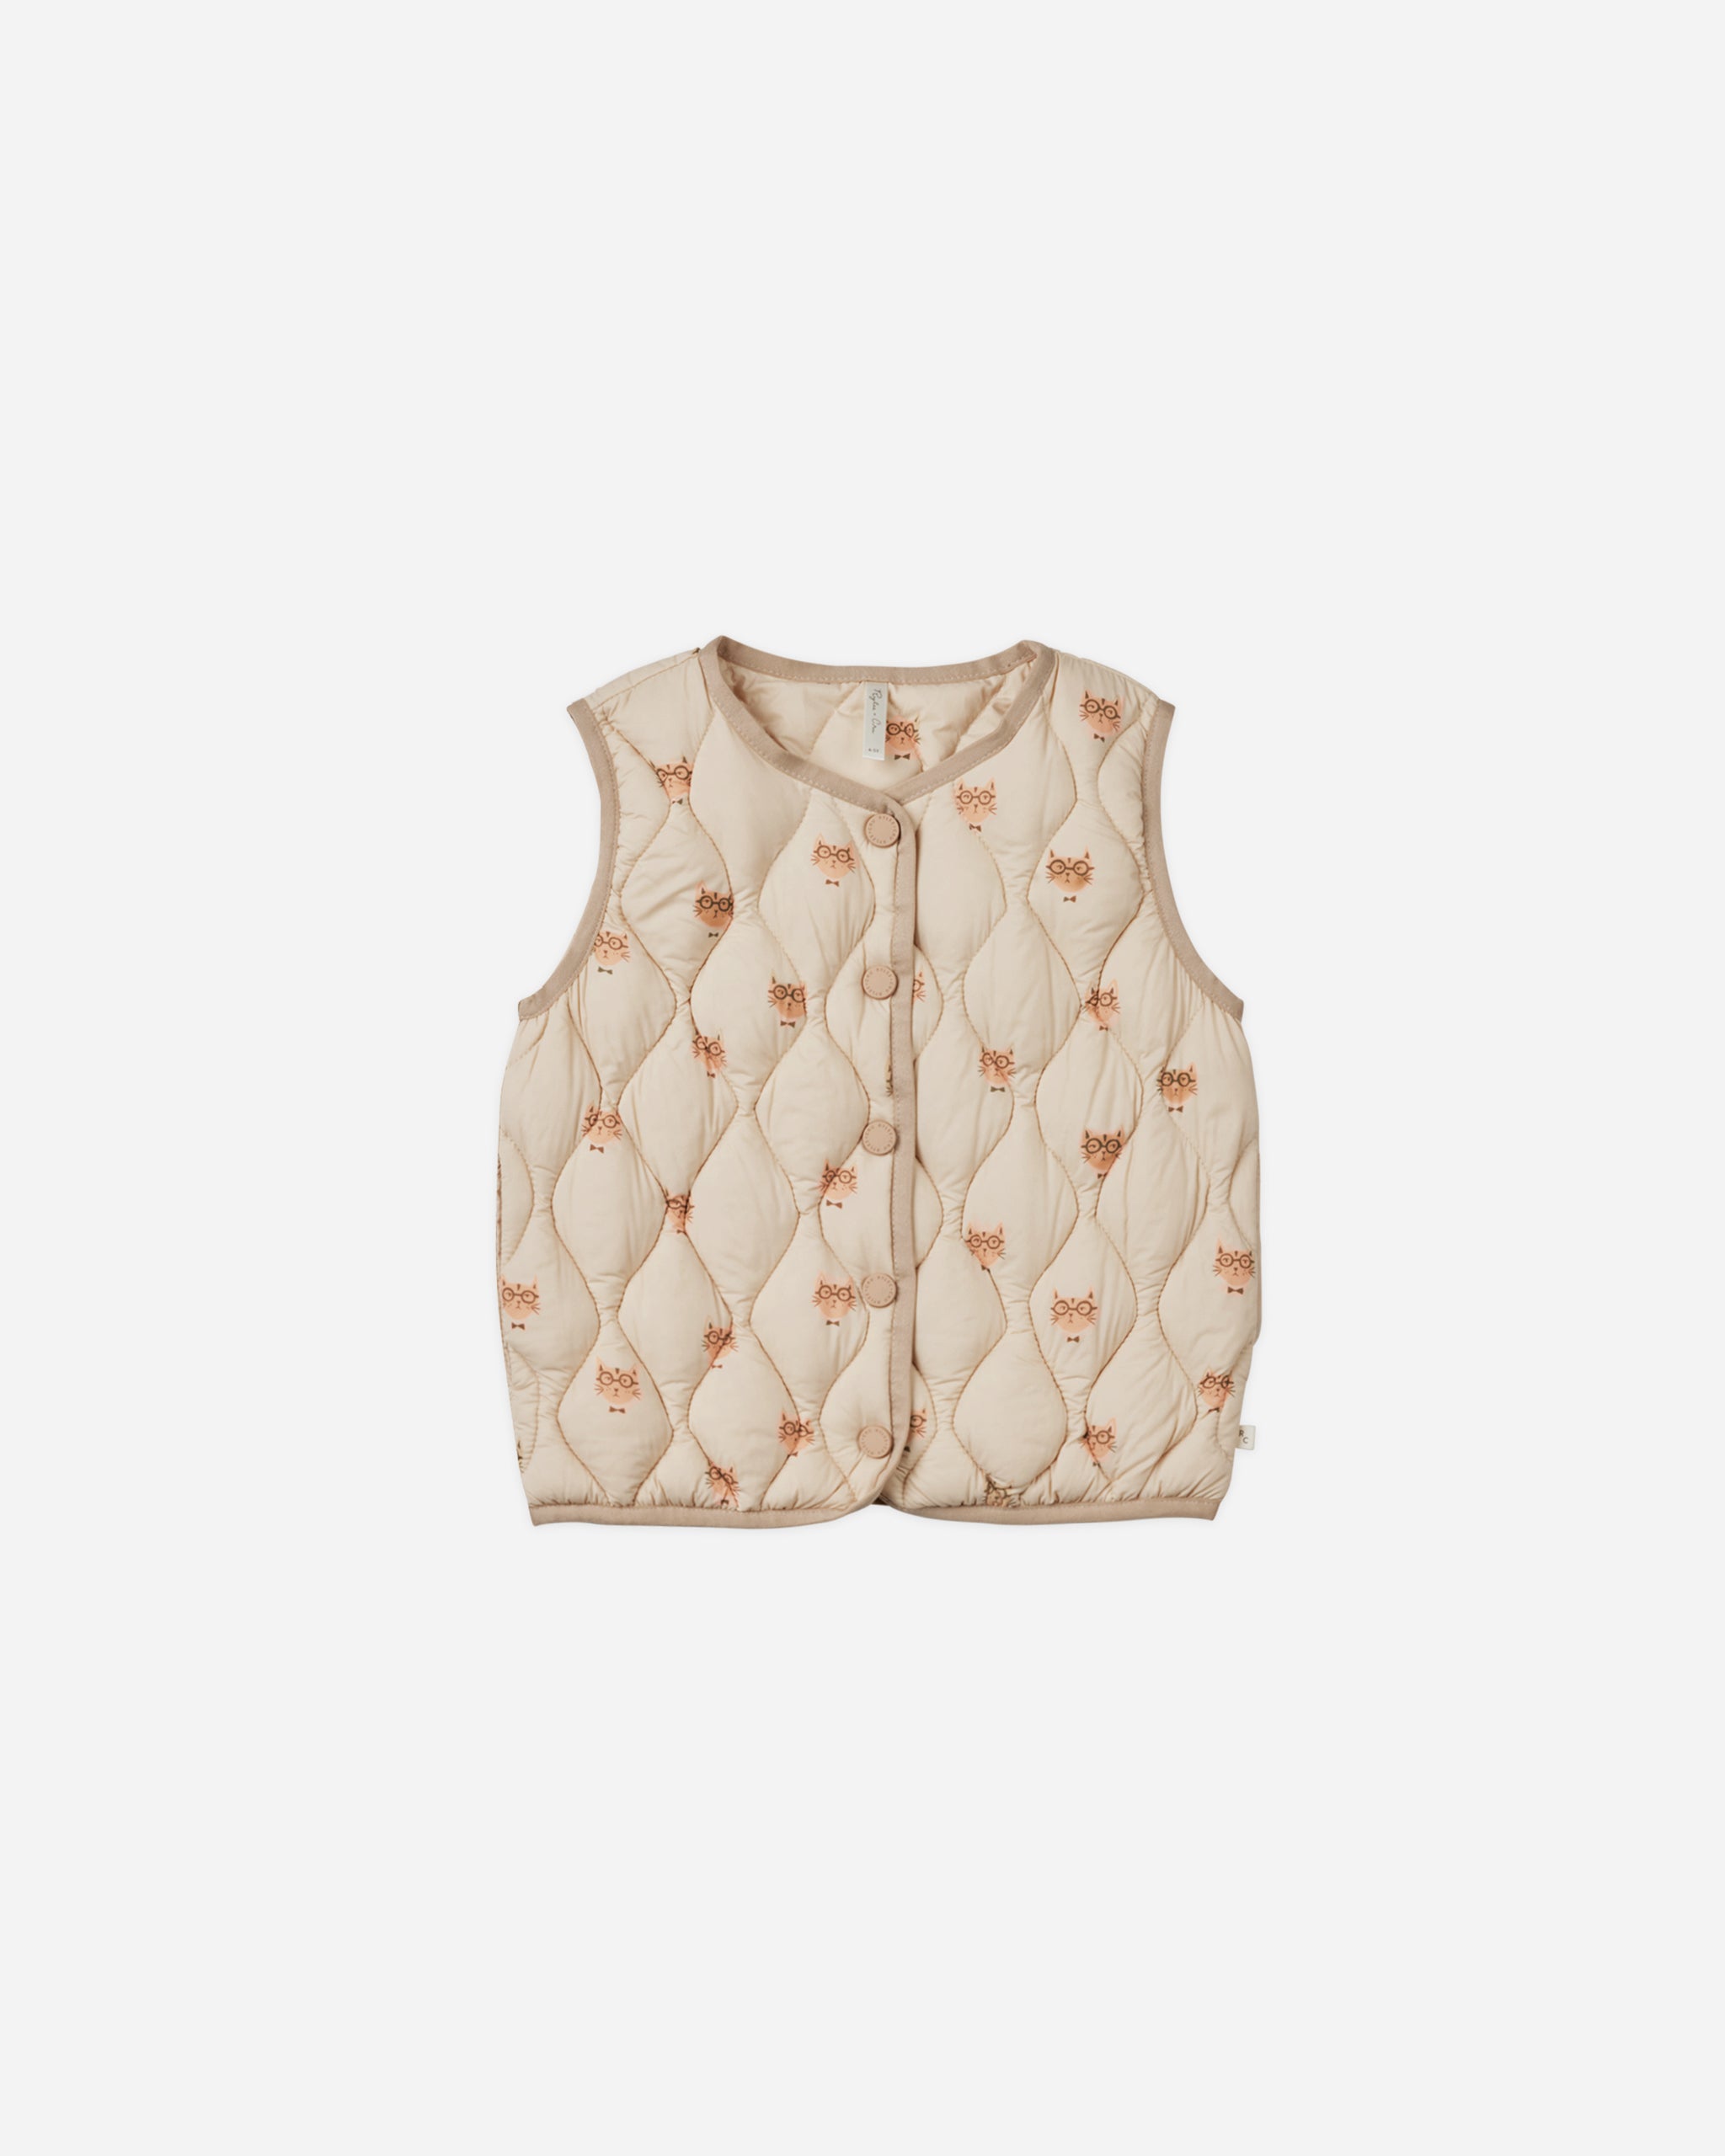 Down Quilted Vest || Cool Cat - Rylee + Cru | Kids Clothes | Trendy Baby Clothes | Modern Infant Outfits |